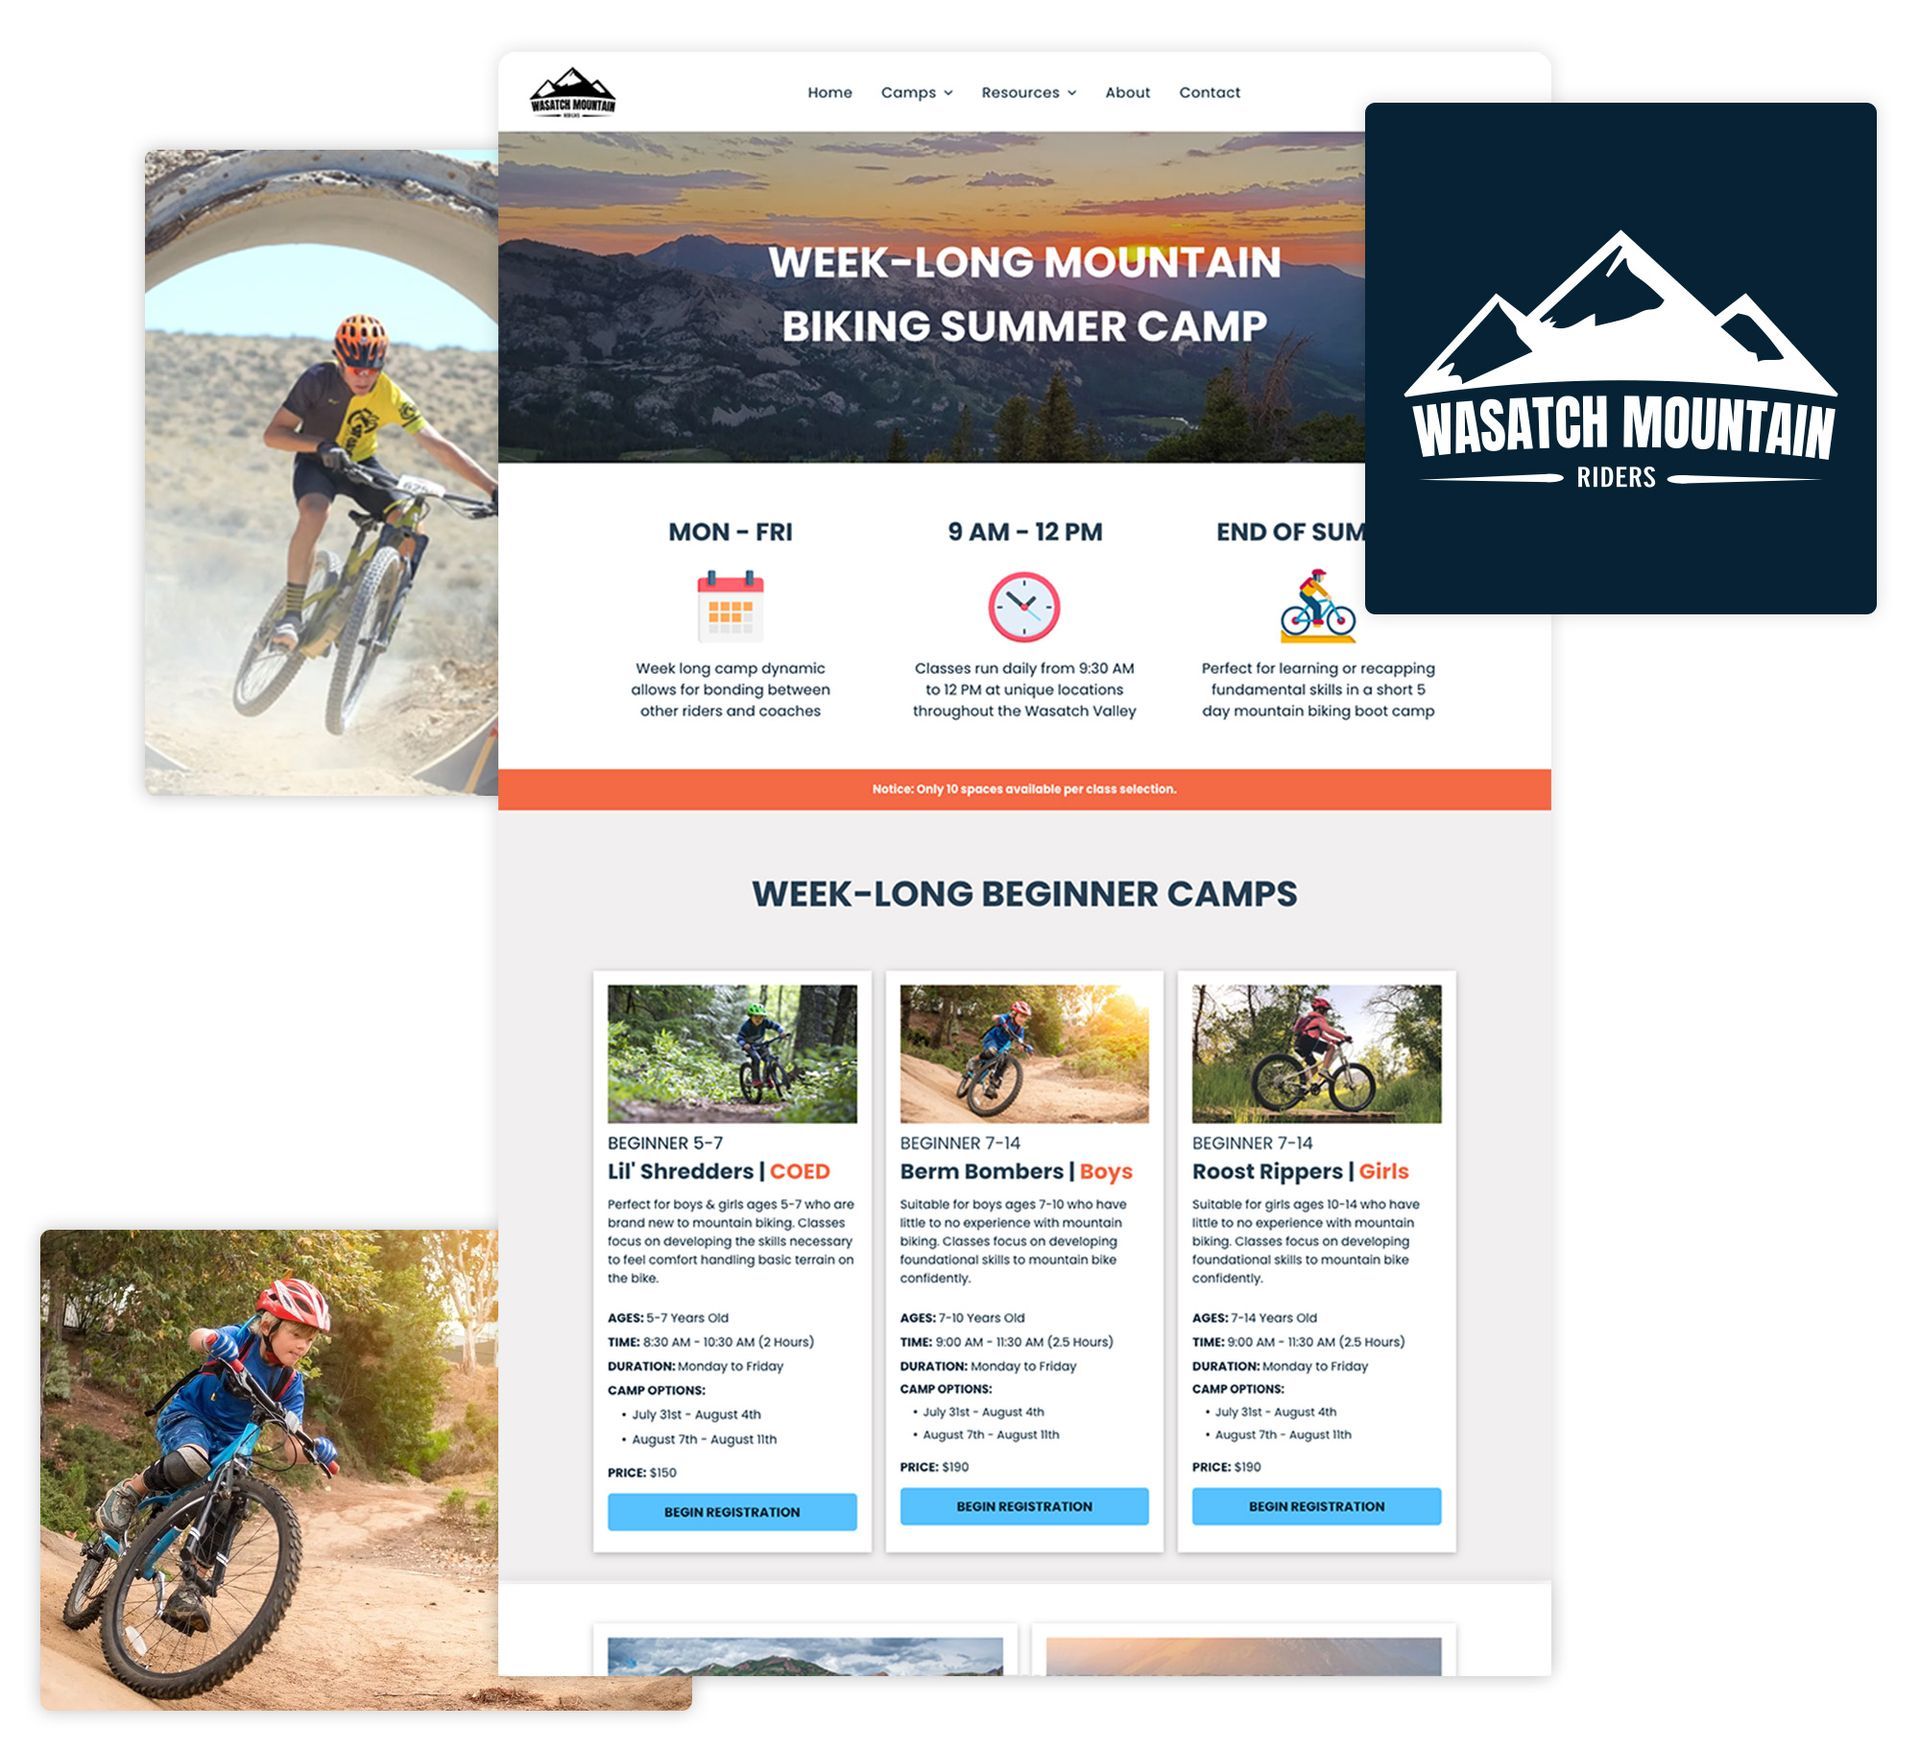 Display of Wasatch Mountain Riders Website